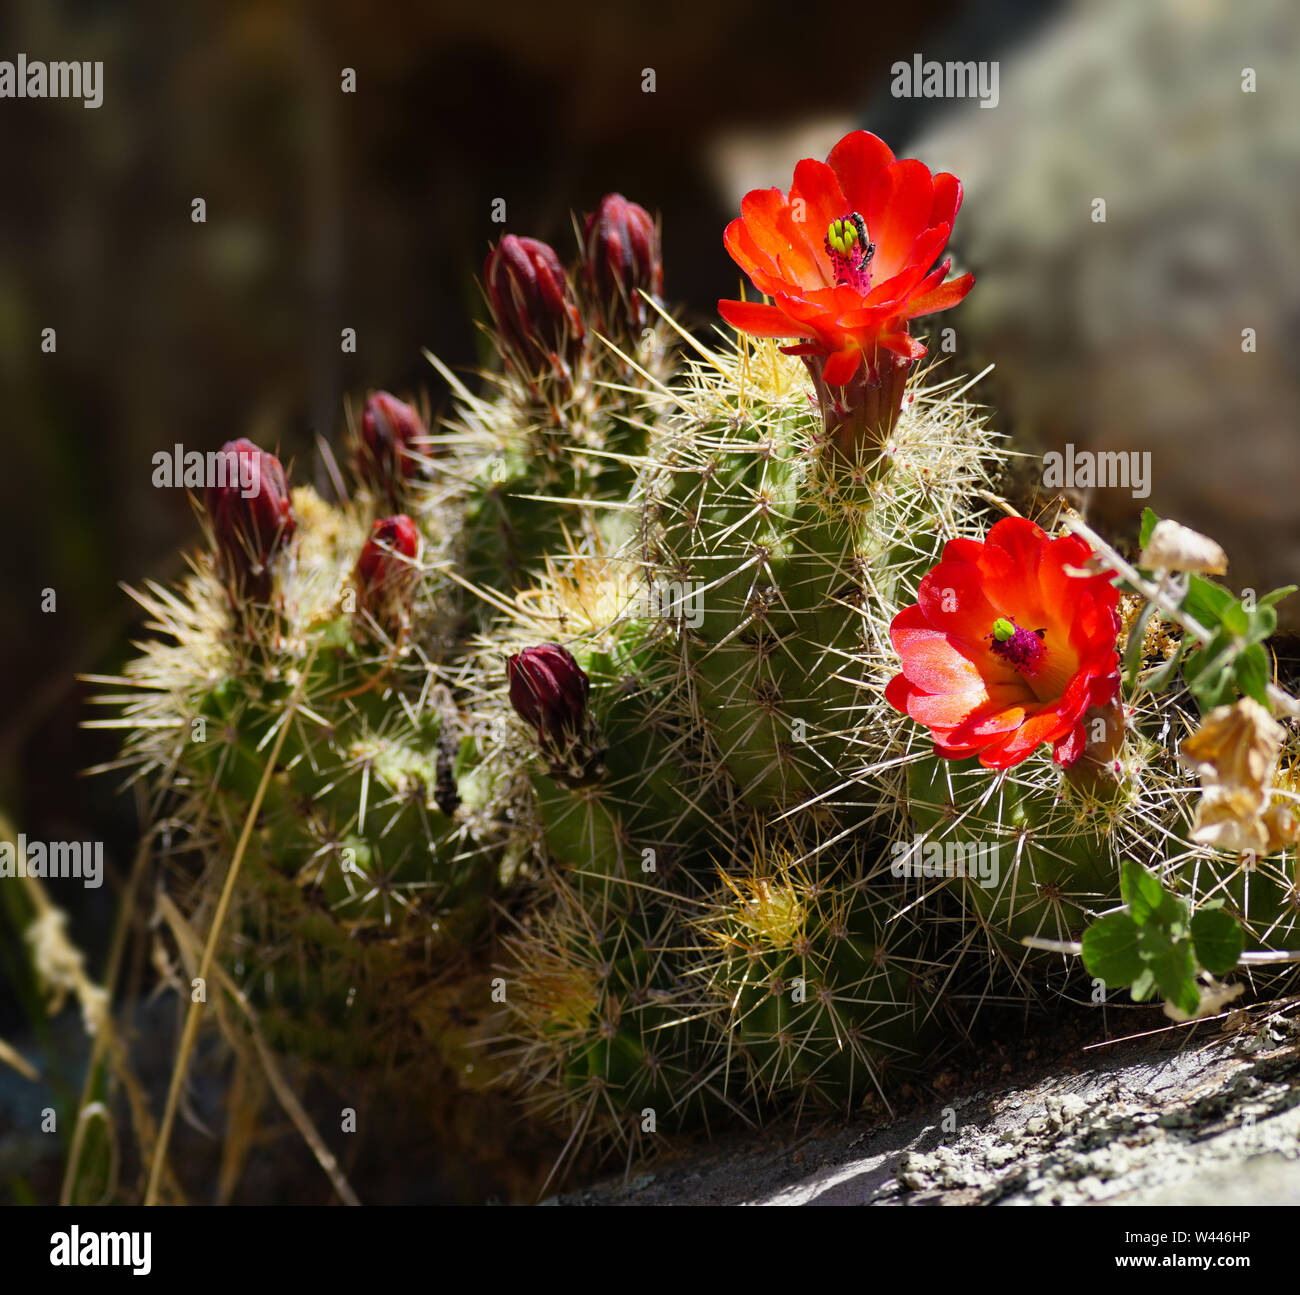 The Bright Red Cactus Flowers of Spring Stock Photo